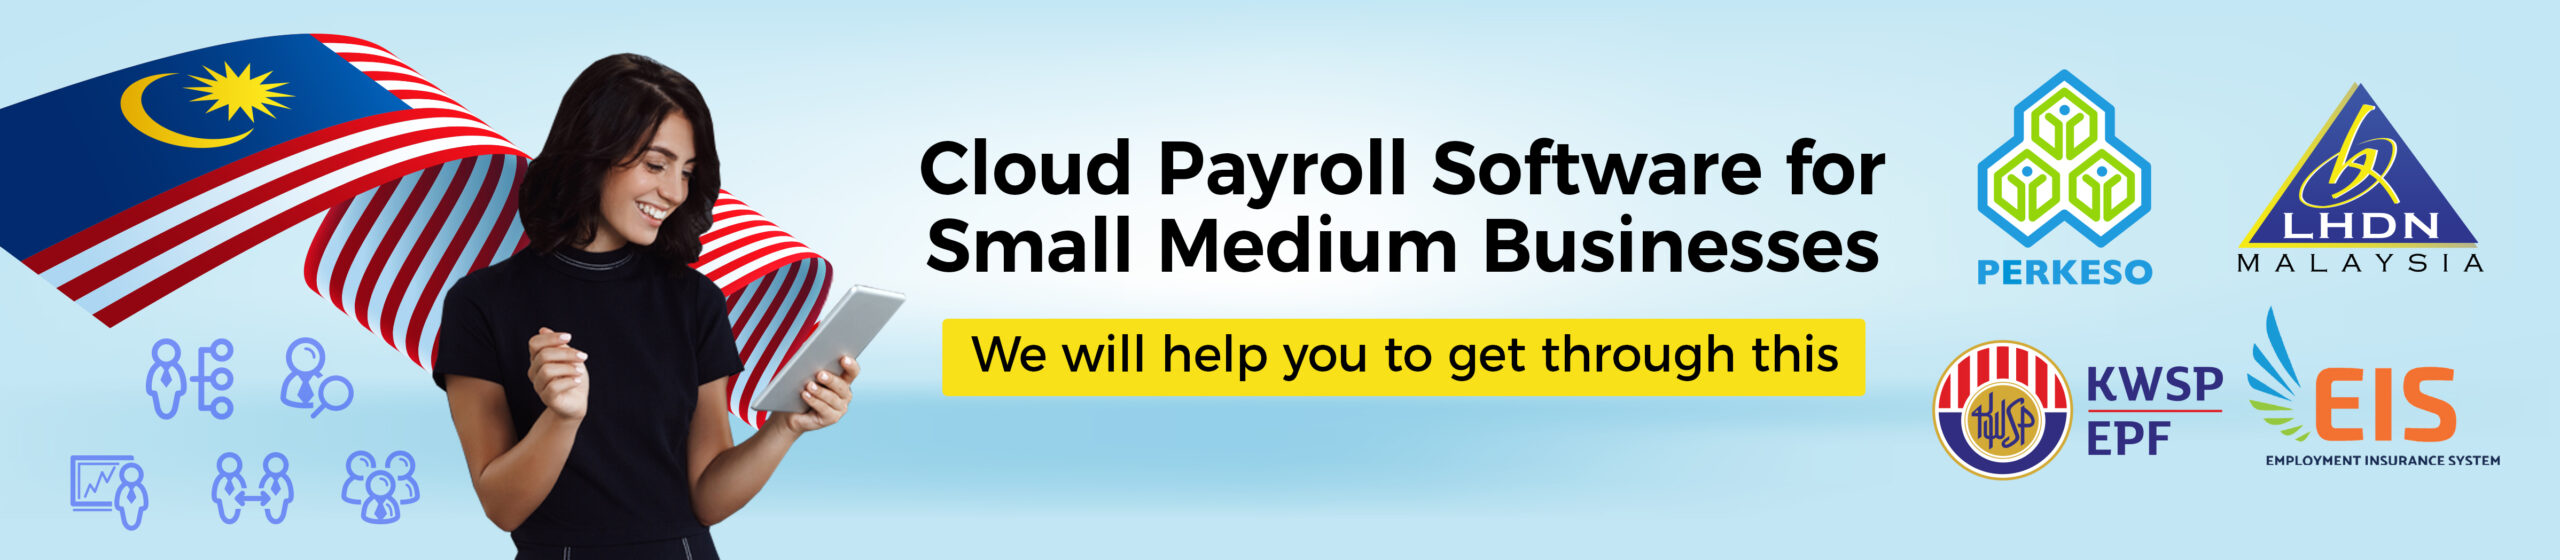 banner cloud payroll software for sme